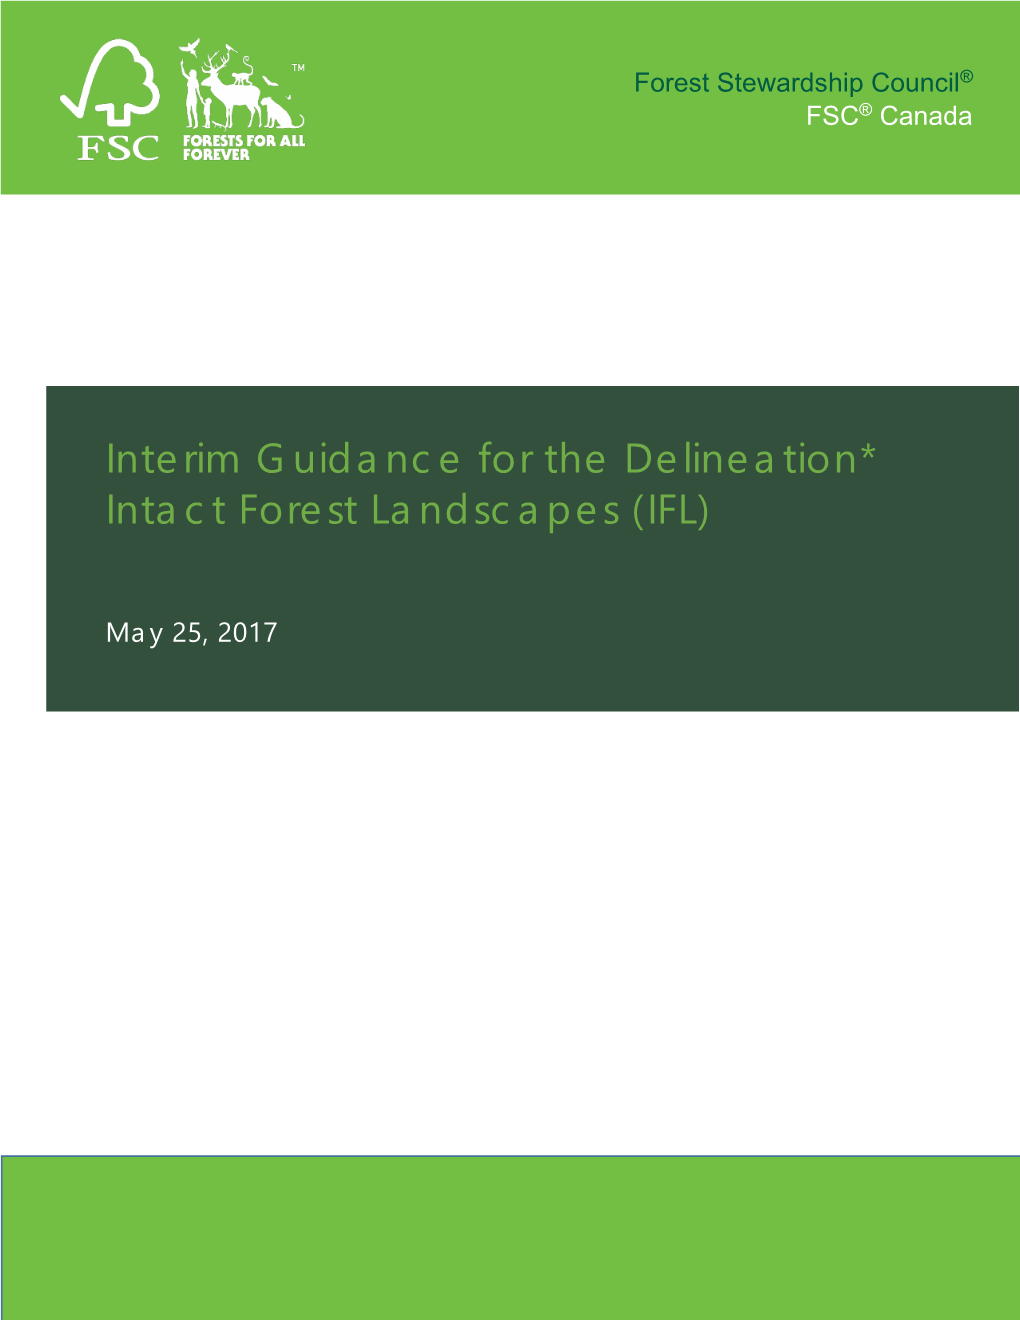 Interim Guidance for the Delineation* Intact Forest Landscapes (IFL)